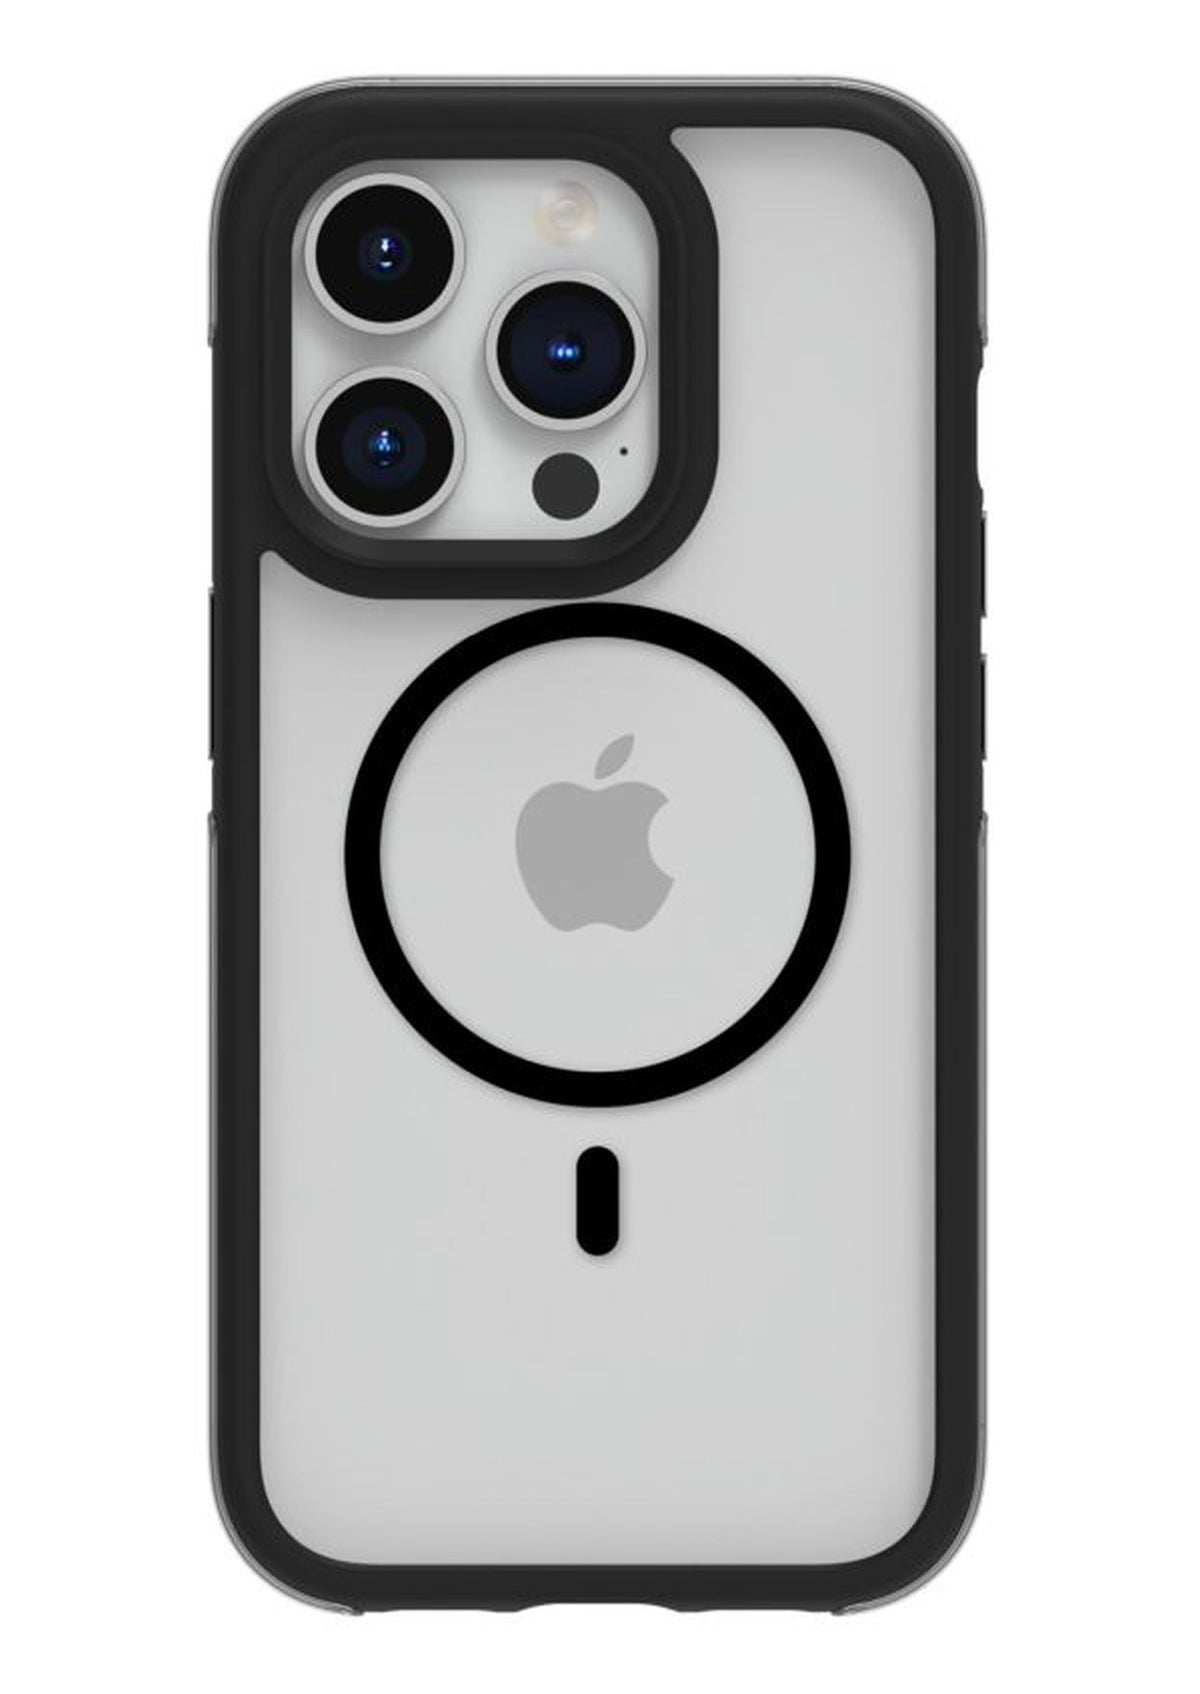 Black and gray iPhone 15 Pro Max in a Raptic Air+ case with military spec drop protection, featuring a circular cutout showing the apple logo and space for a camera with three lenses.